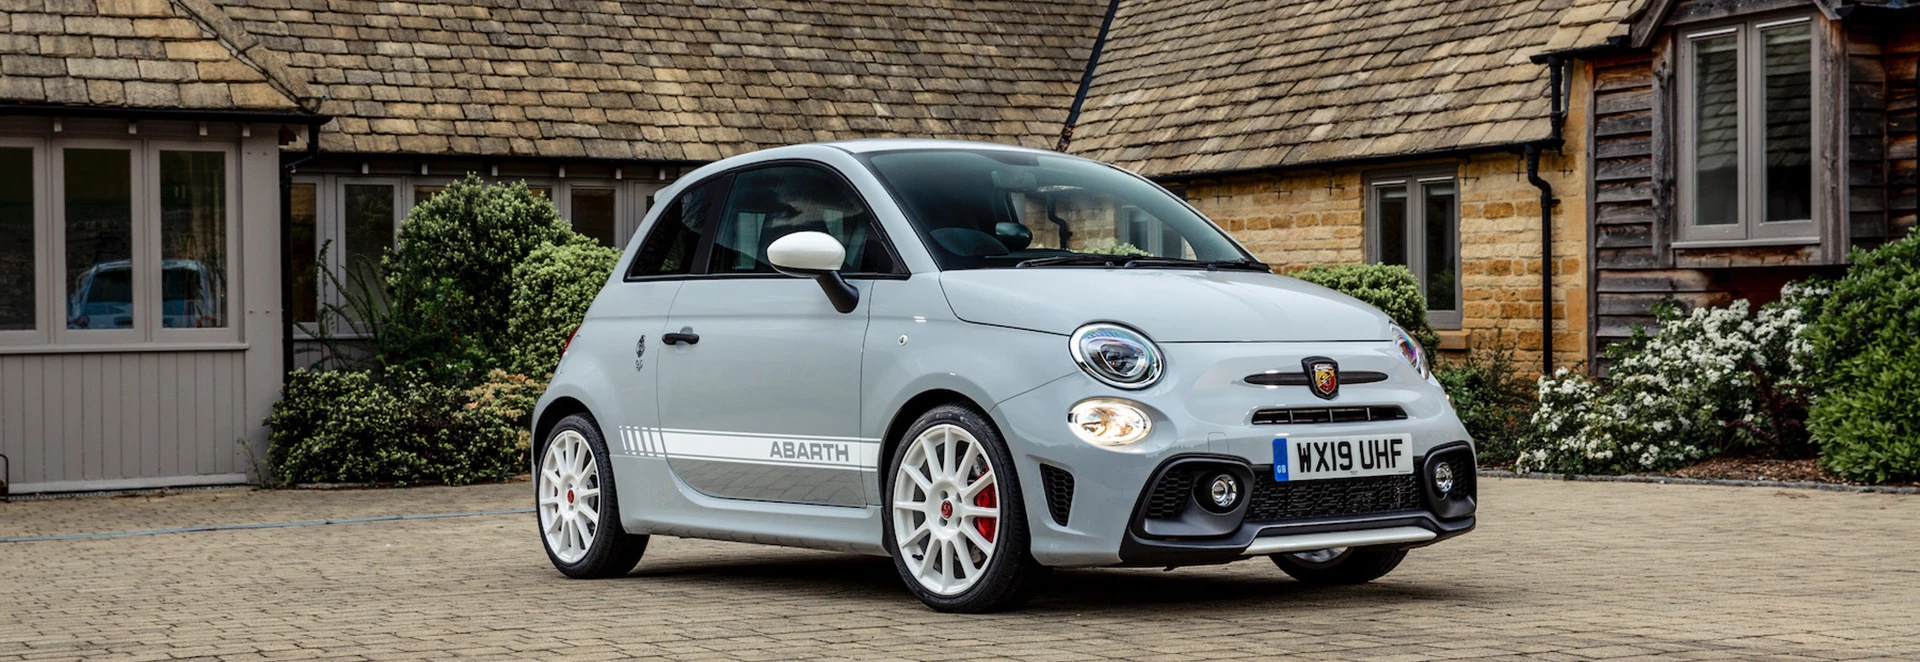 5 reasons why the Abarth 595 is the perfect post-lockdown hot hatch 